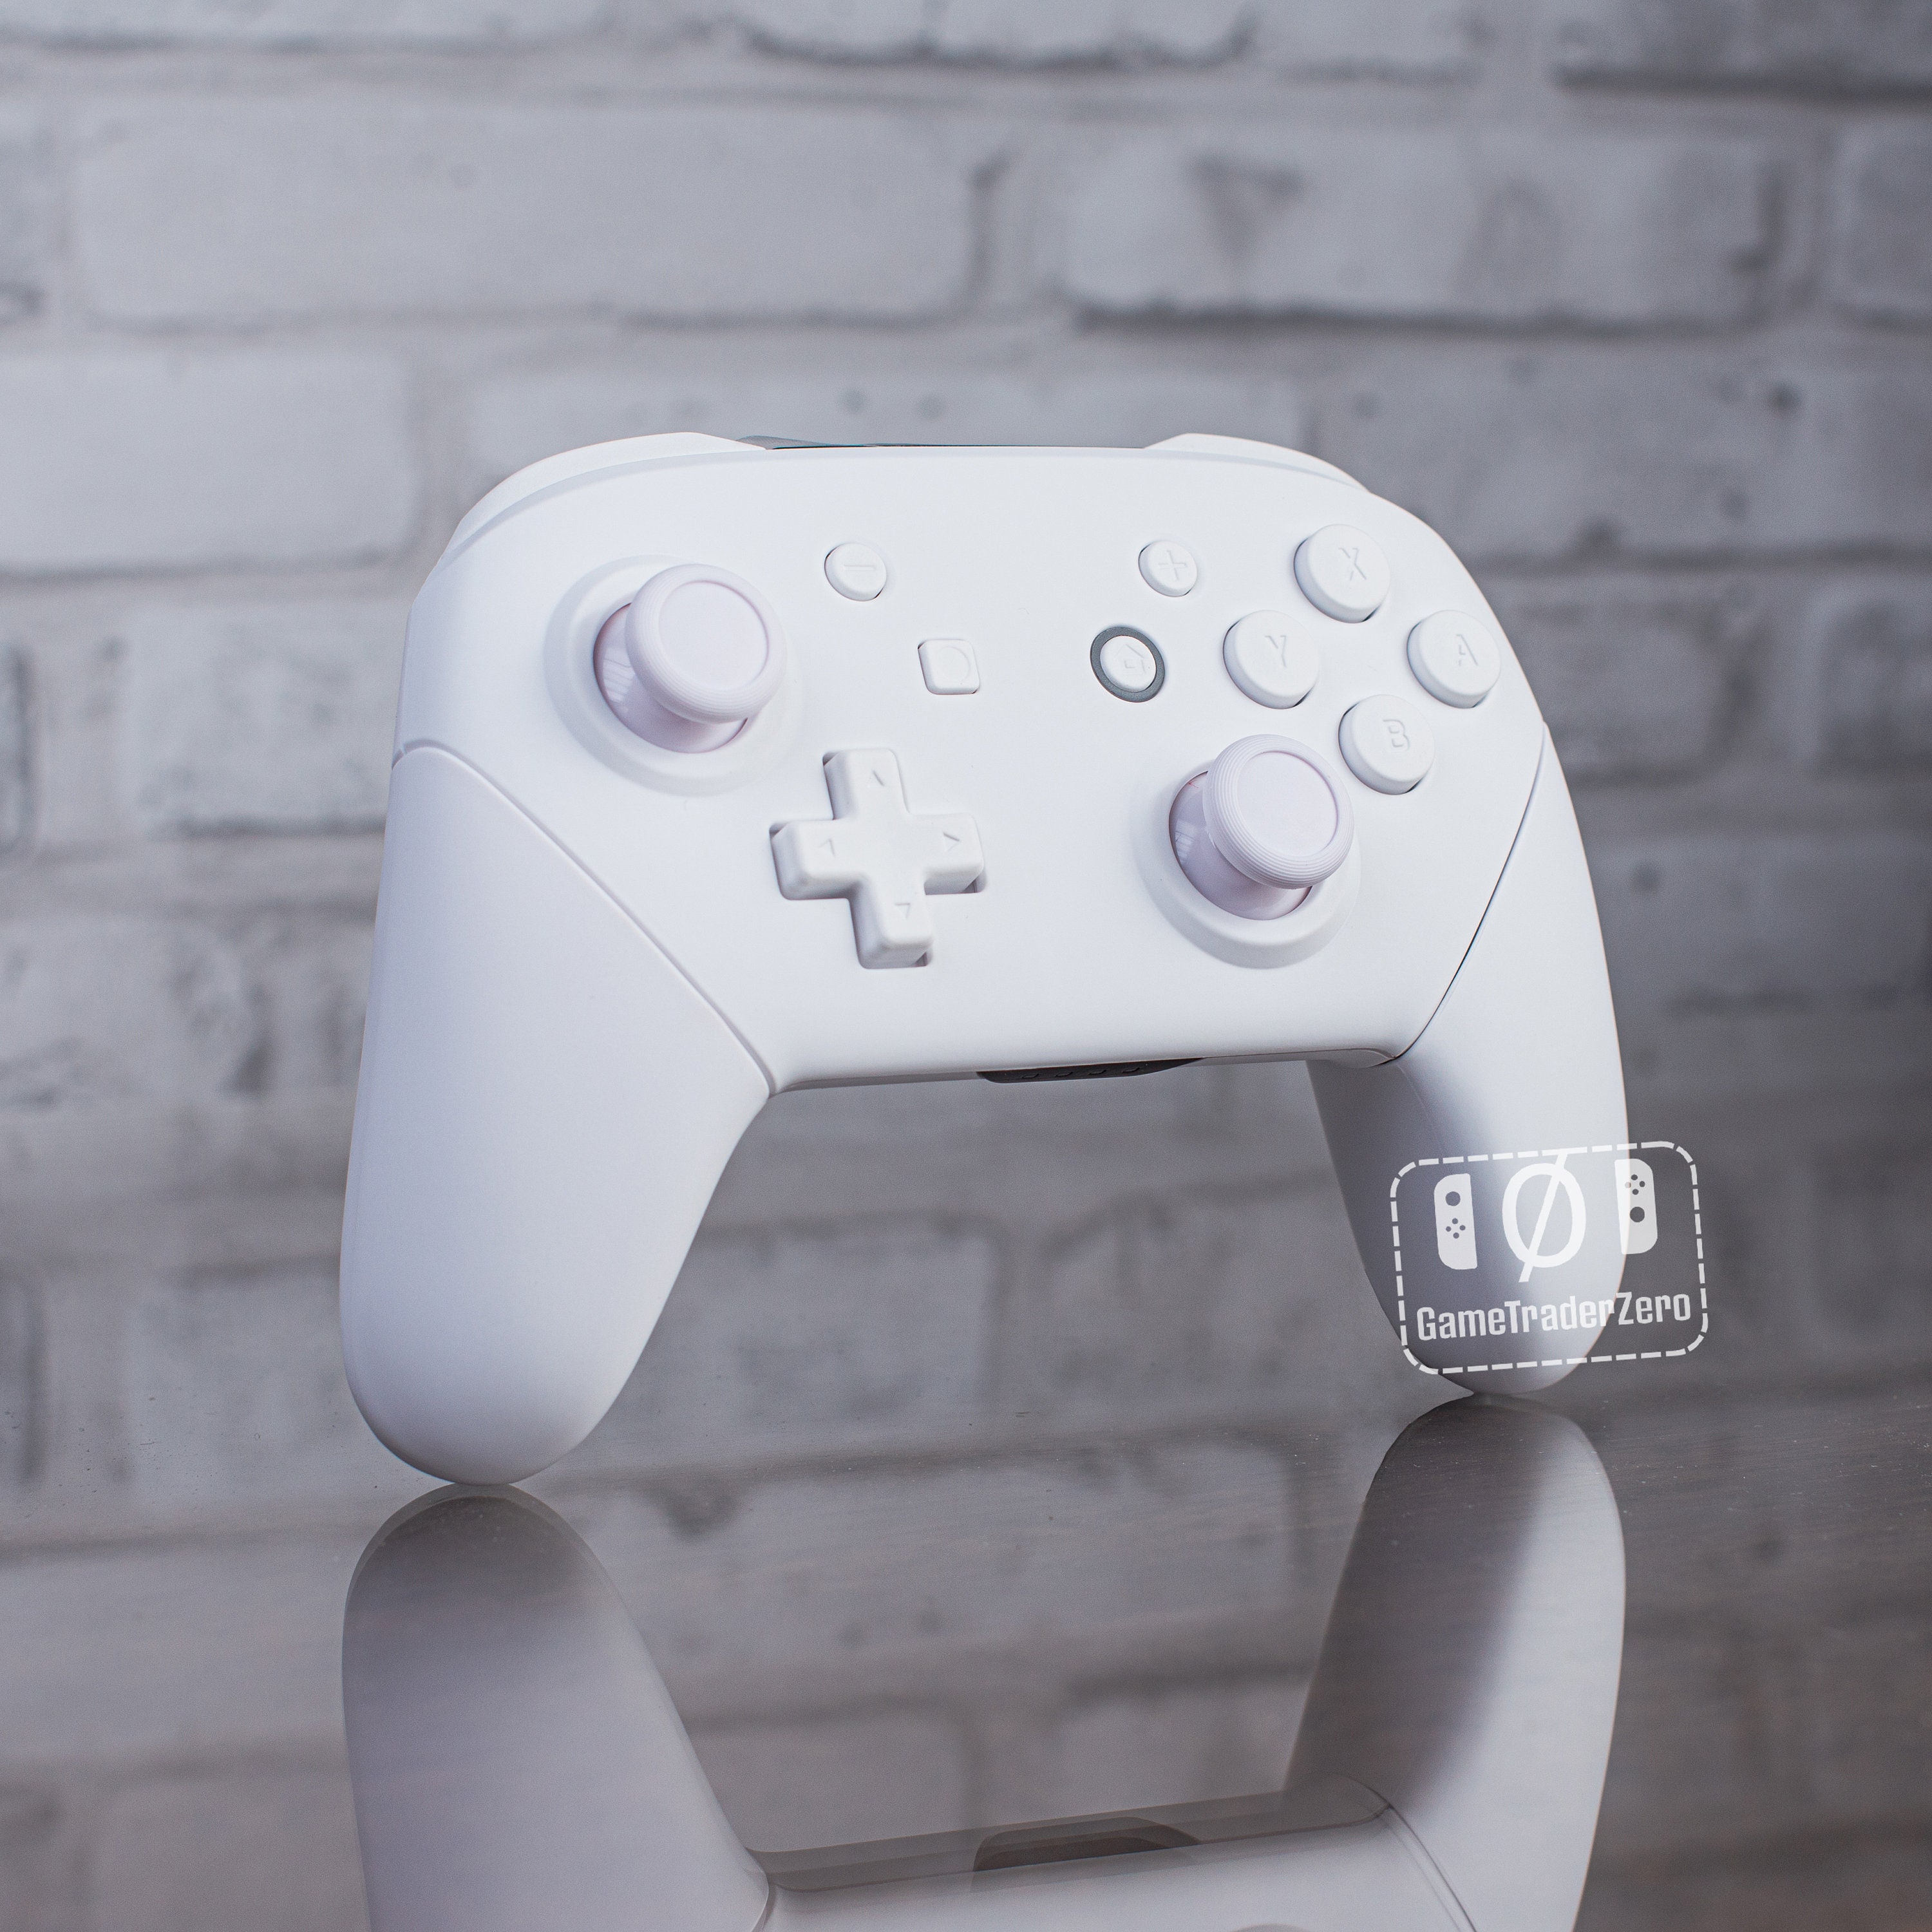 Nintendo Switch Pro Controller White on White Mod Minimalistic Controller  With White Butons 